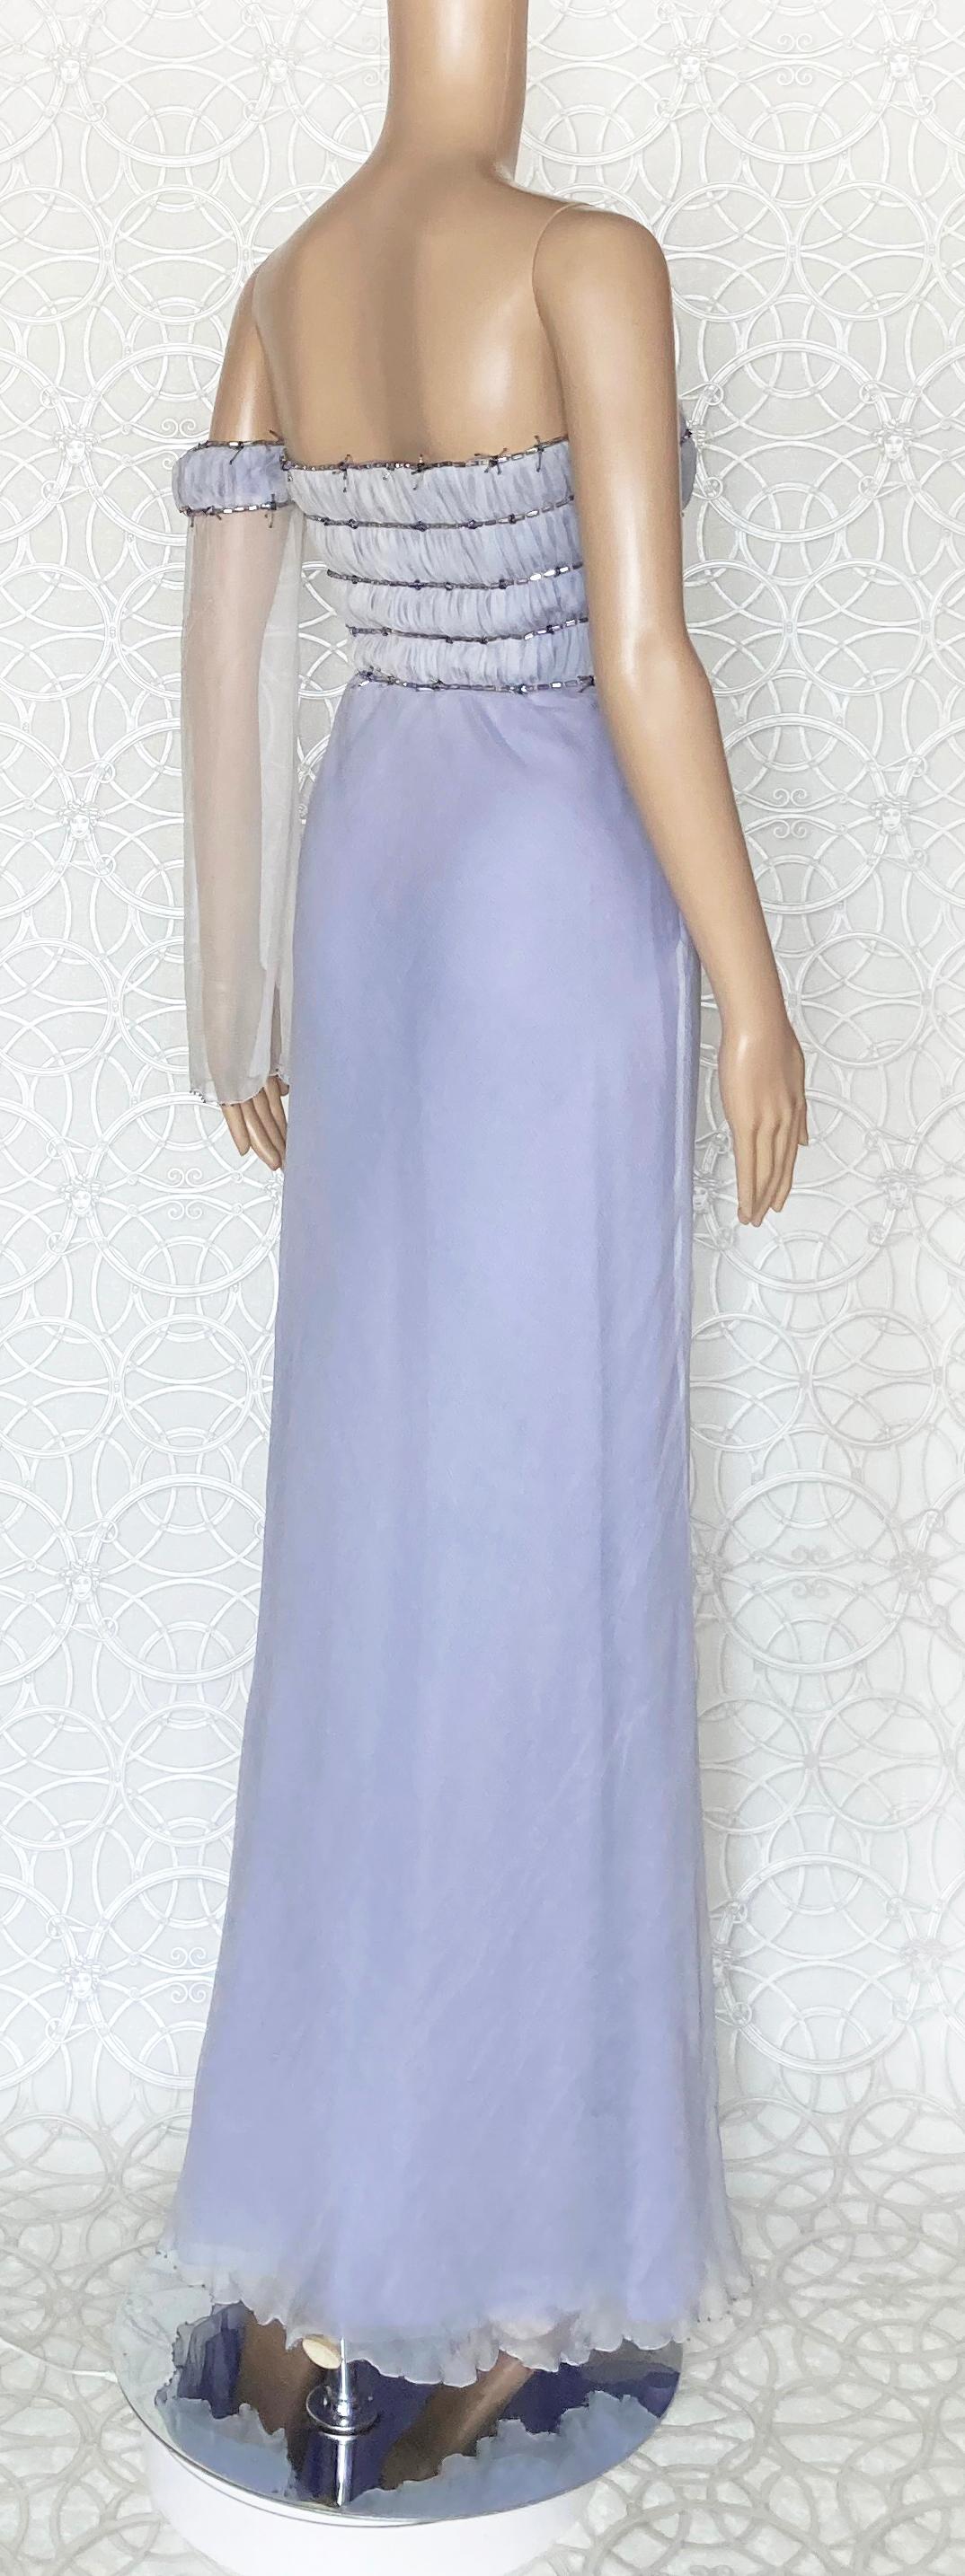 F/W 1998 VINTAGE GIANNI VERSACE COUTURE LILAC Dress 38 - 2 2